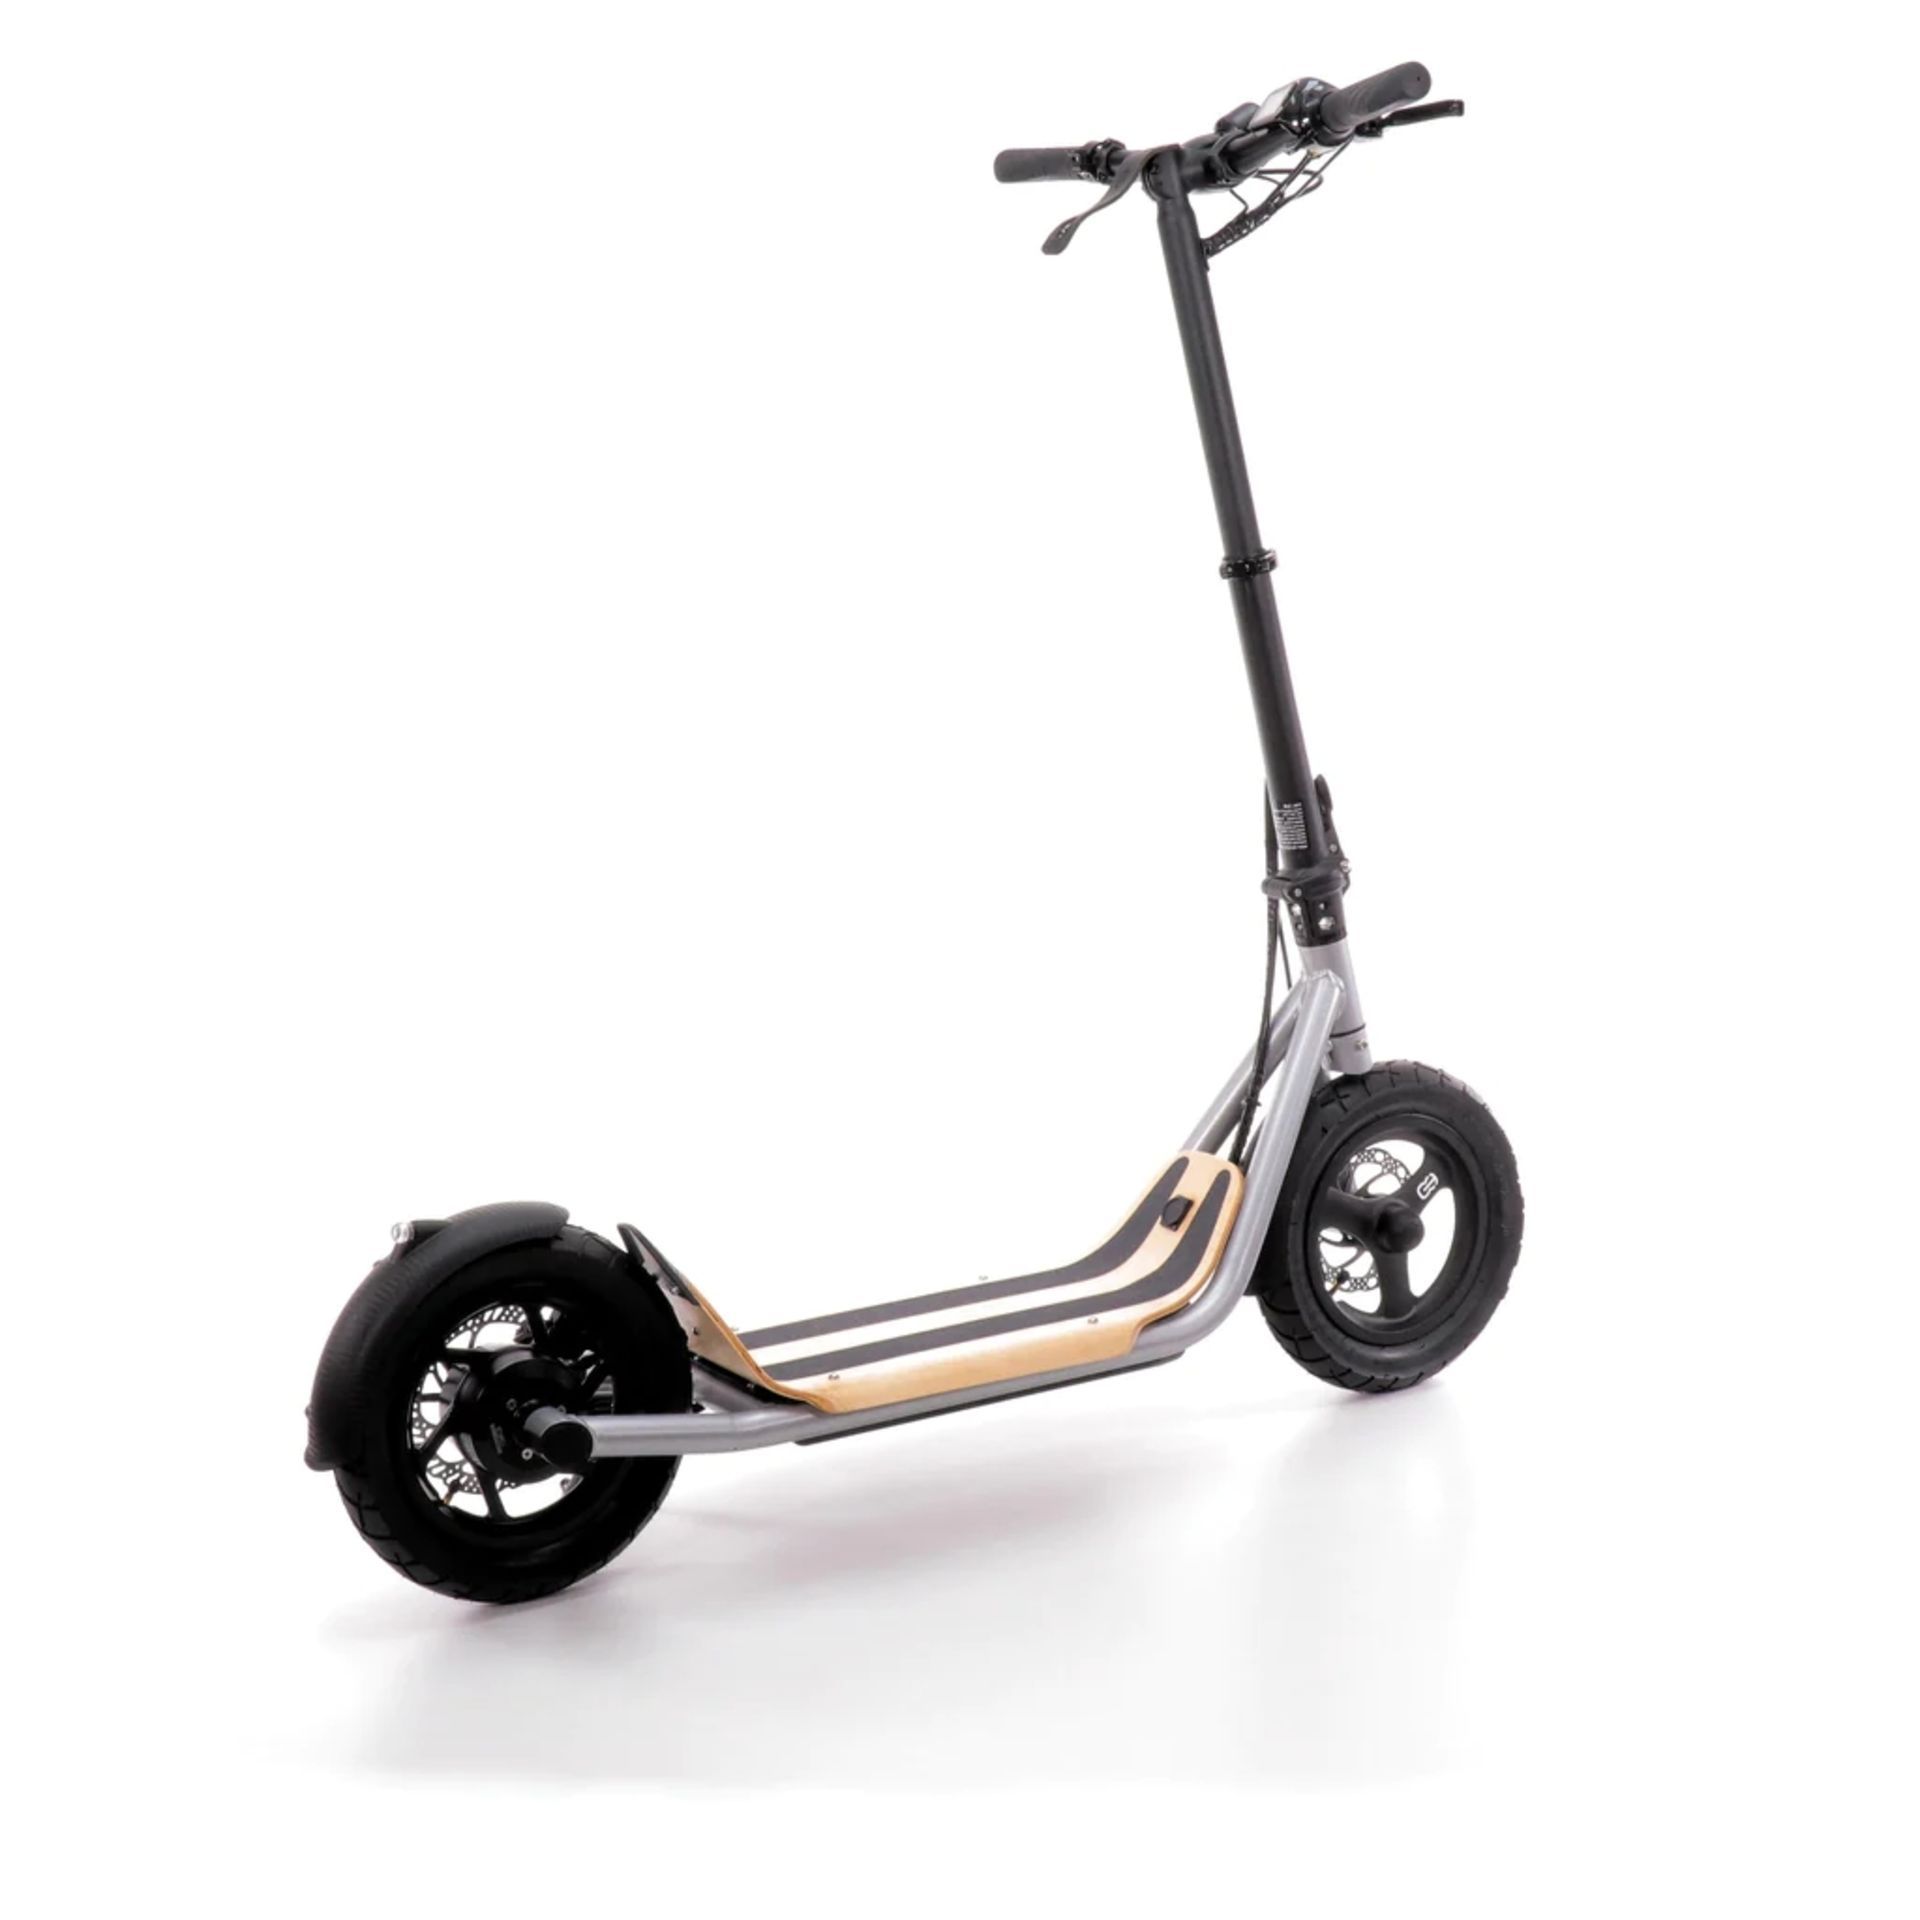 BRAND NEW 8TEV B12 PROXI CLASSIC ELECTRIC SCOOTER SILVER RRP £1299, Perfect city commuter vehicle - Image 2 of 2